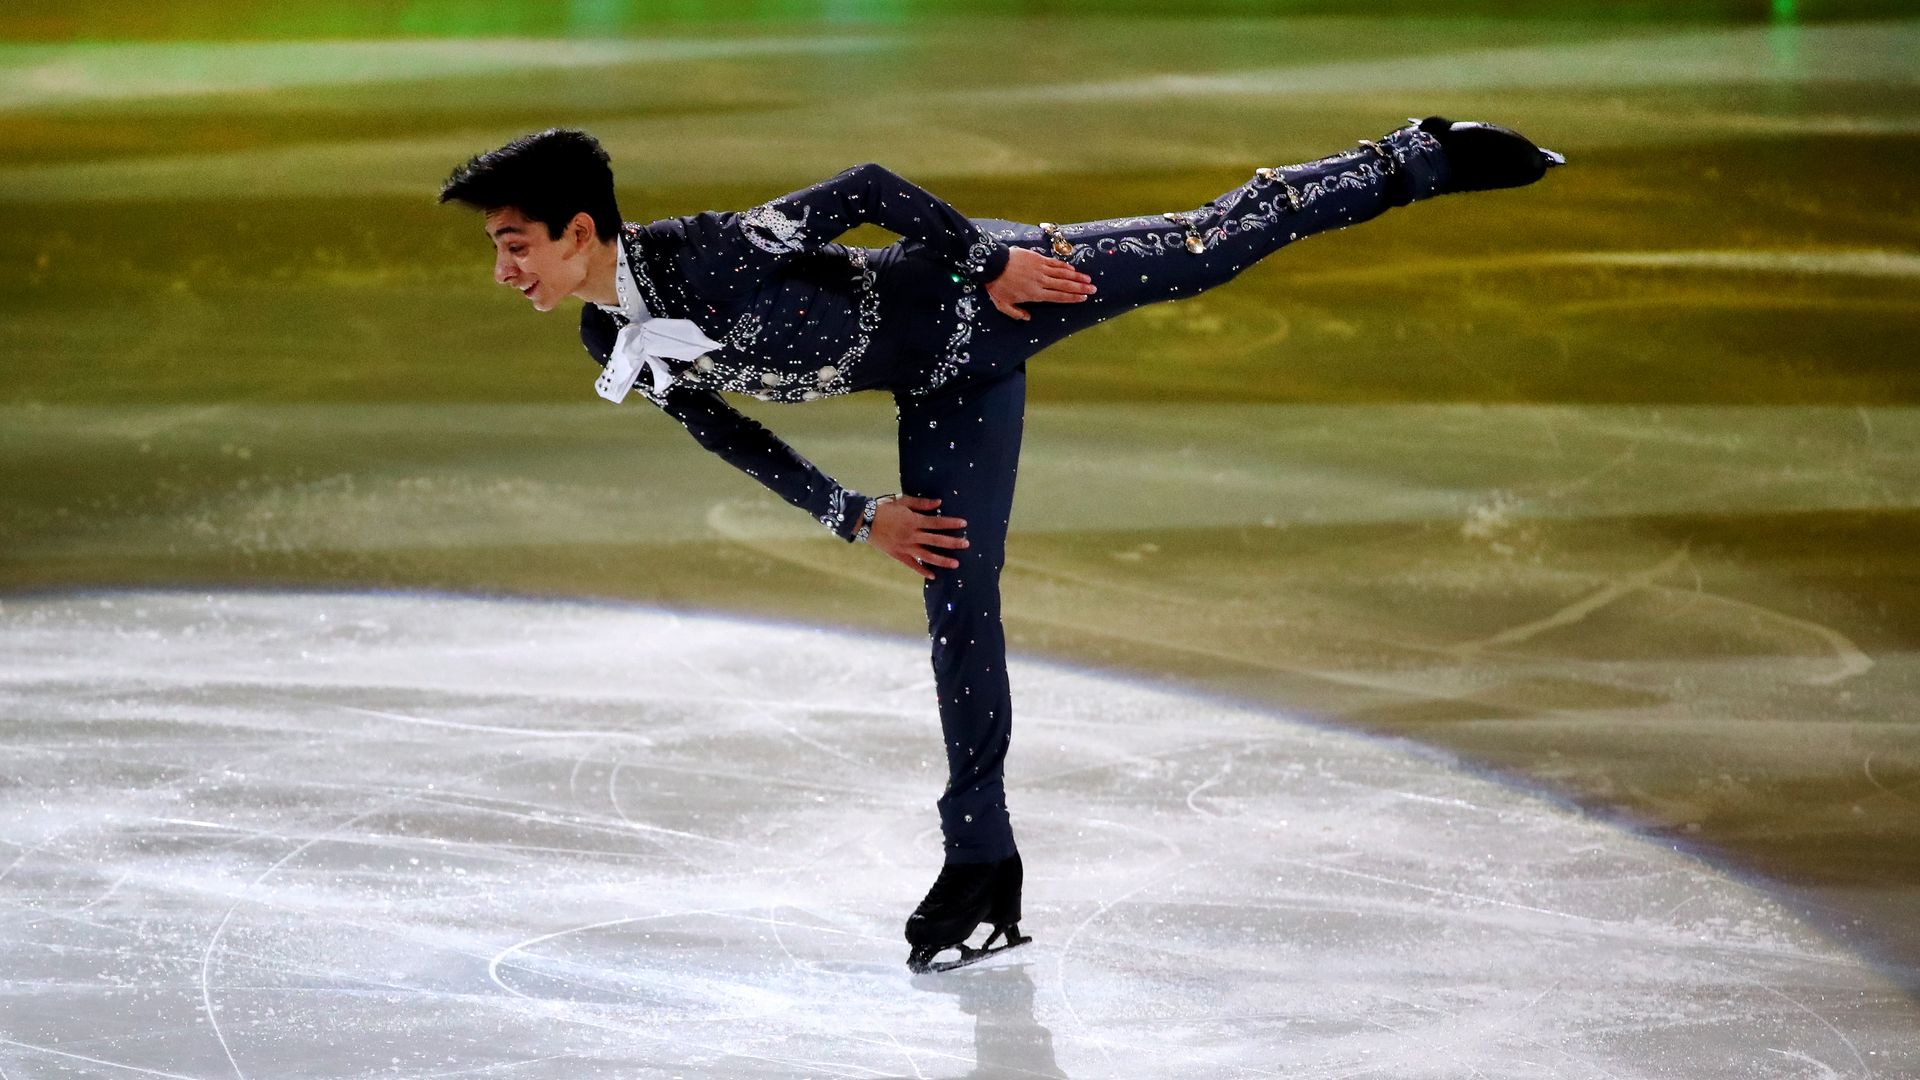 Olympic skater Donovan Carillo, wearing a mariachi outfit, skates on ice, his right leg in the air